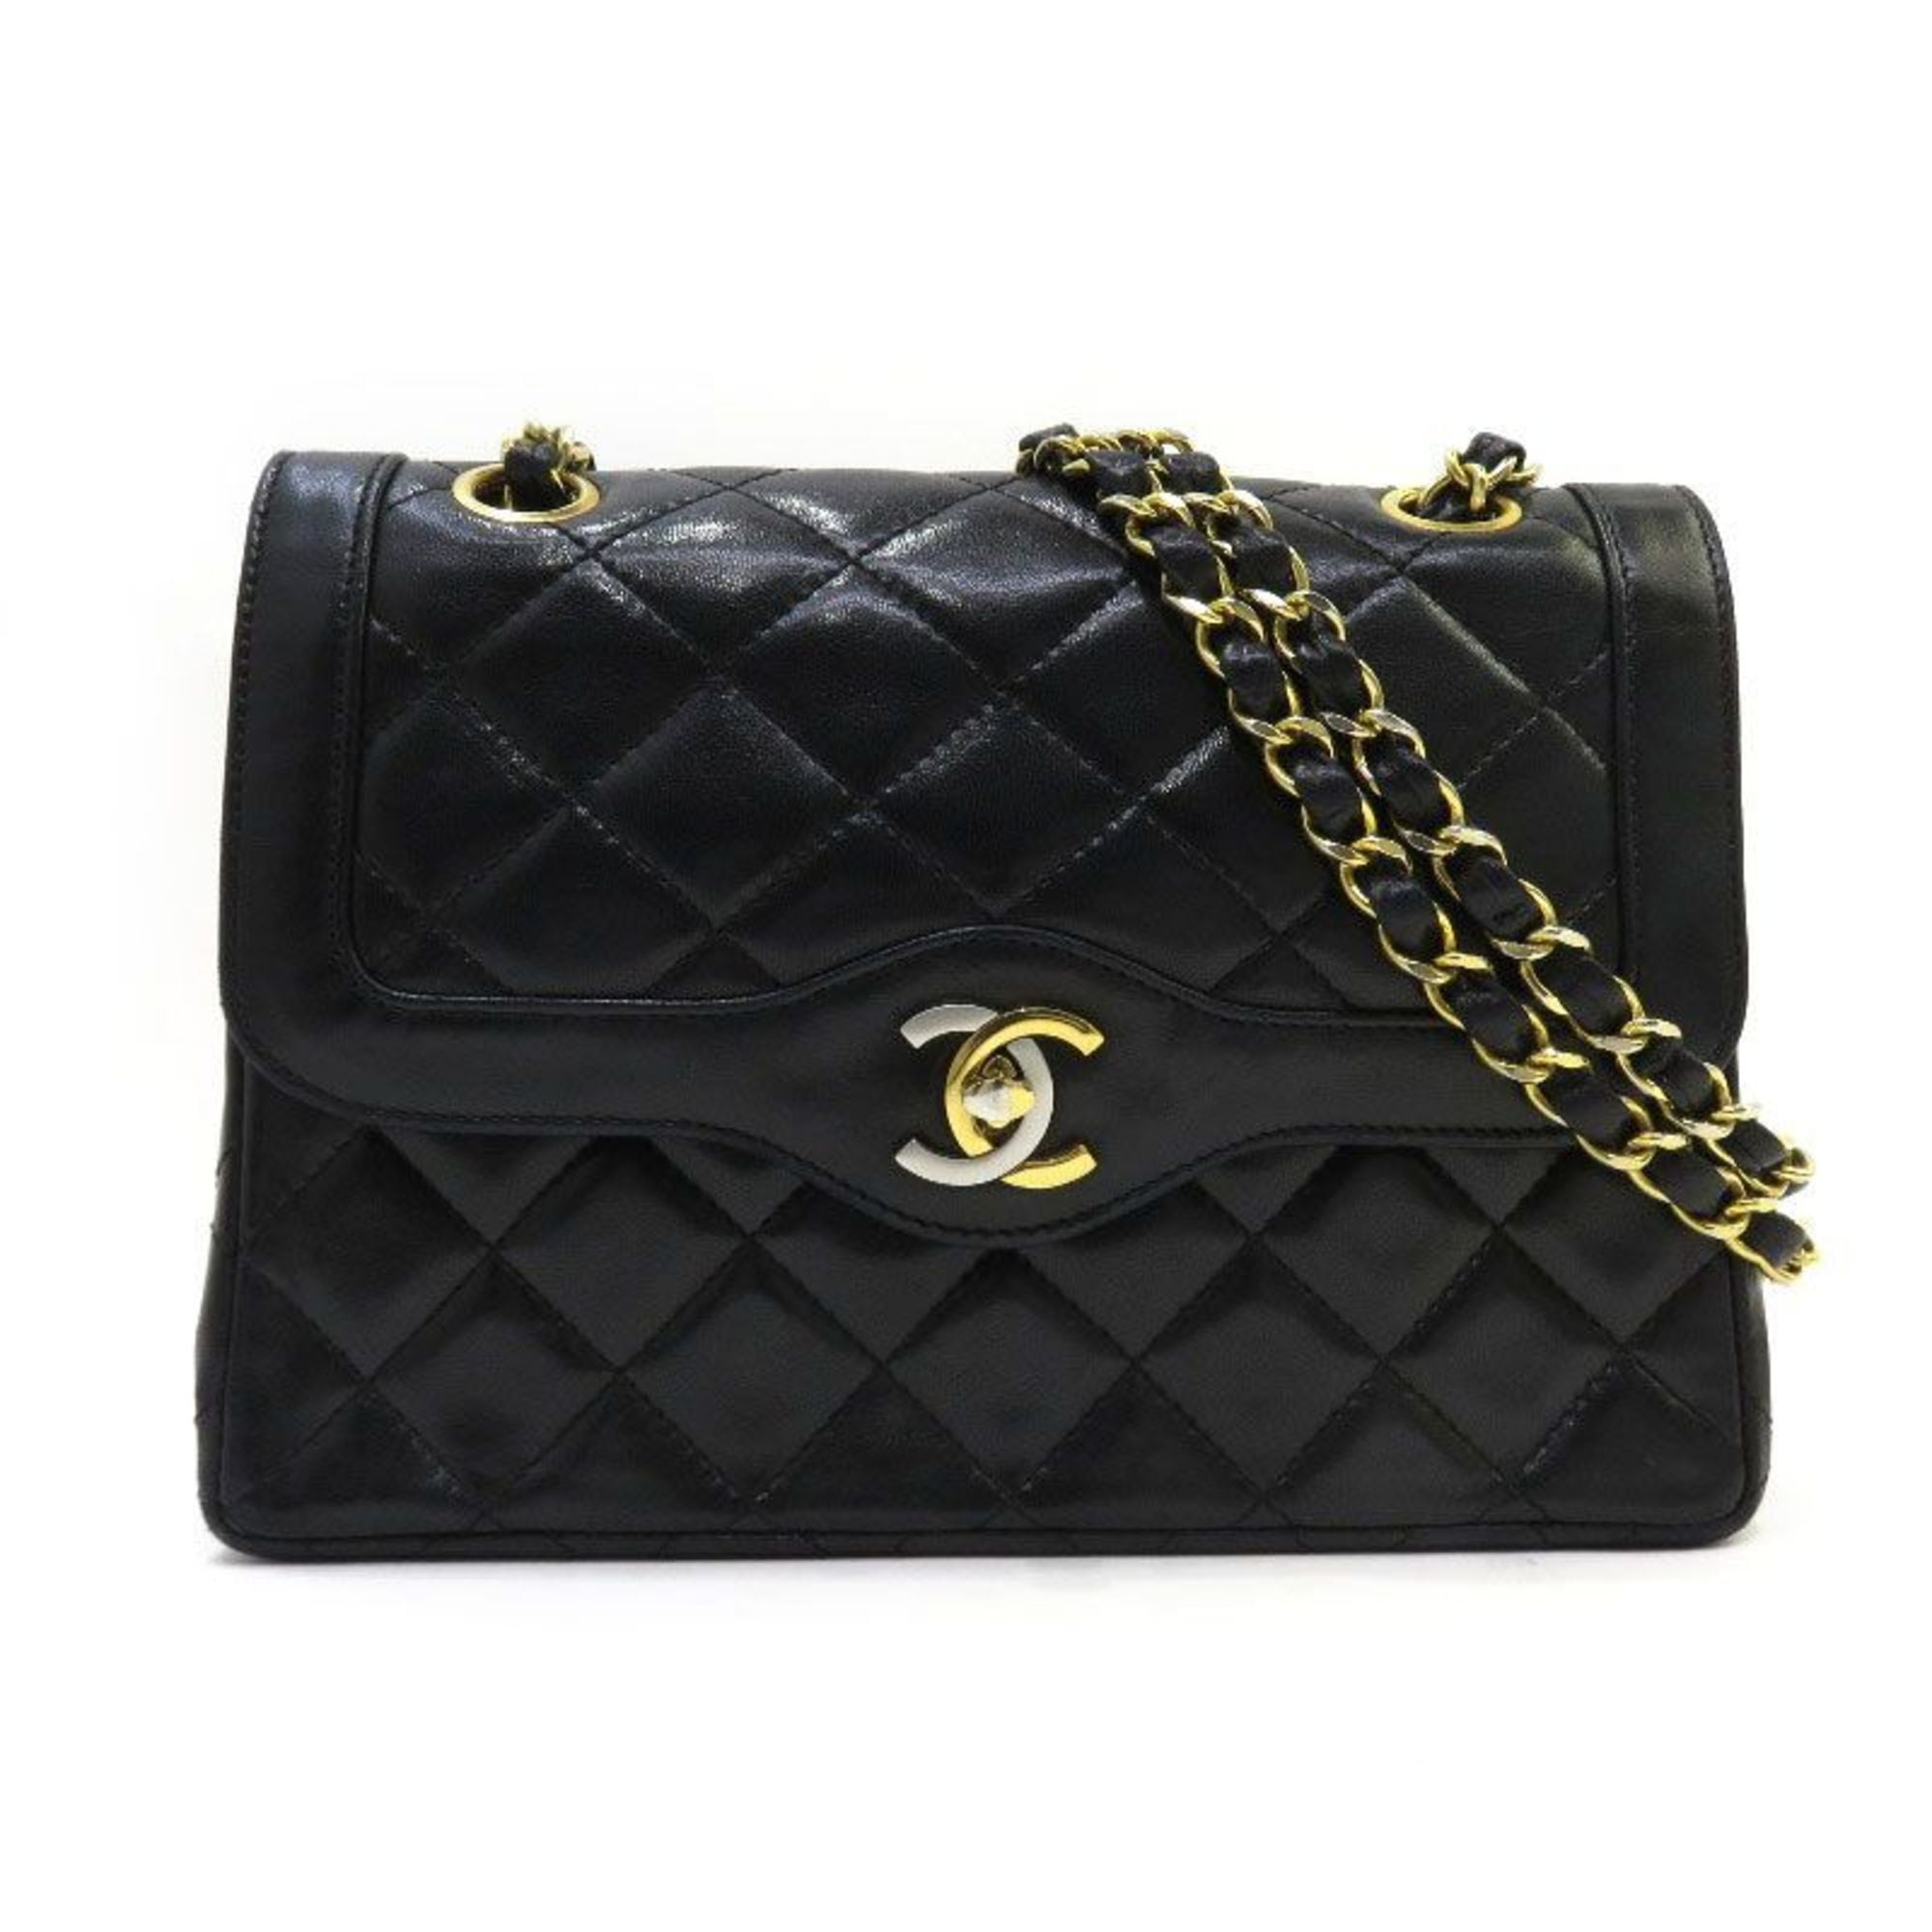 Authenticated Used CHANEL Chanel matelasse Paris limited W chain flap ...